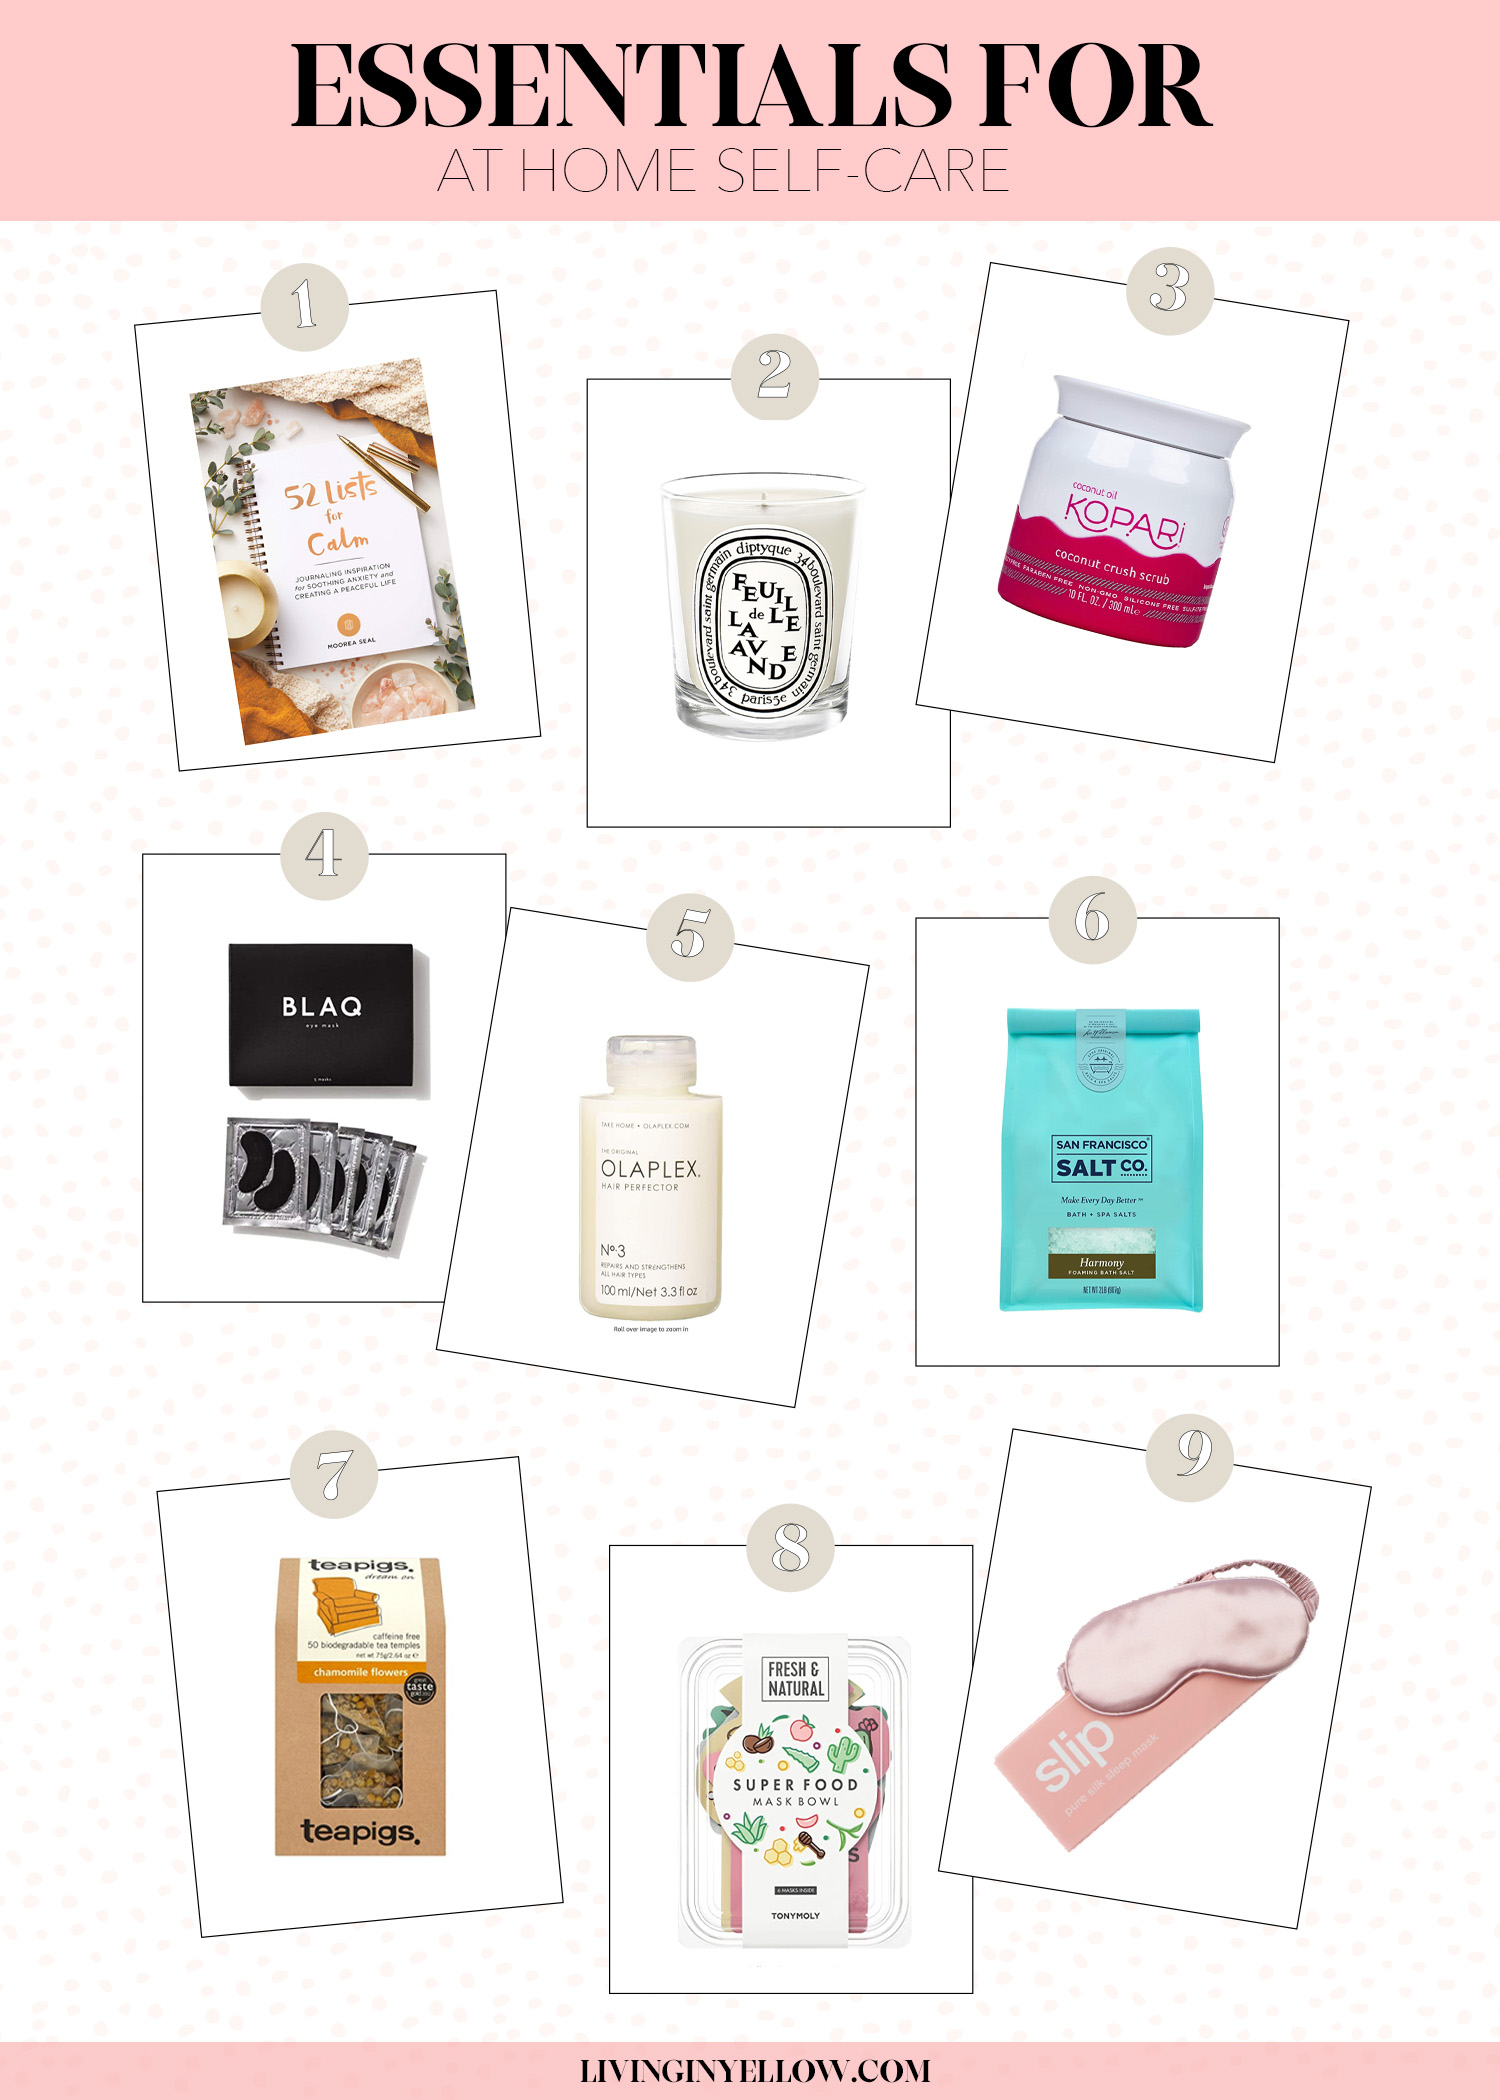 How to Make a Self Care Kit + 20 Items to Include - NunziaDreams